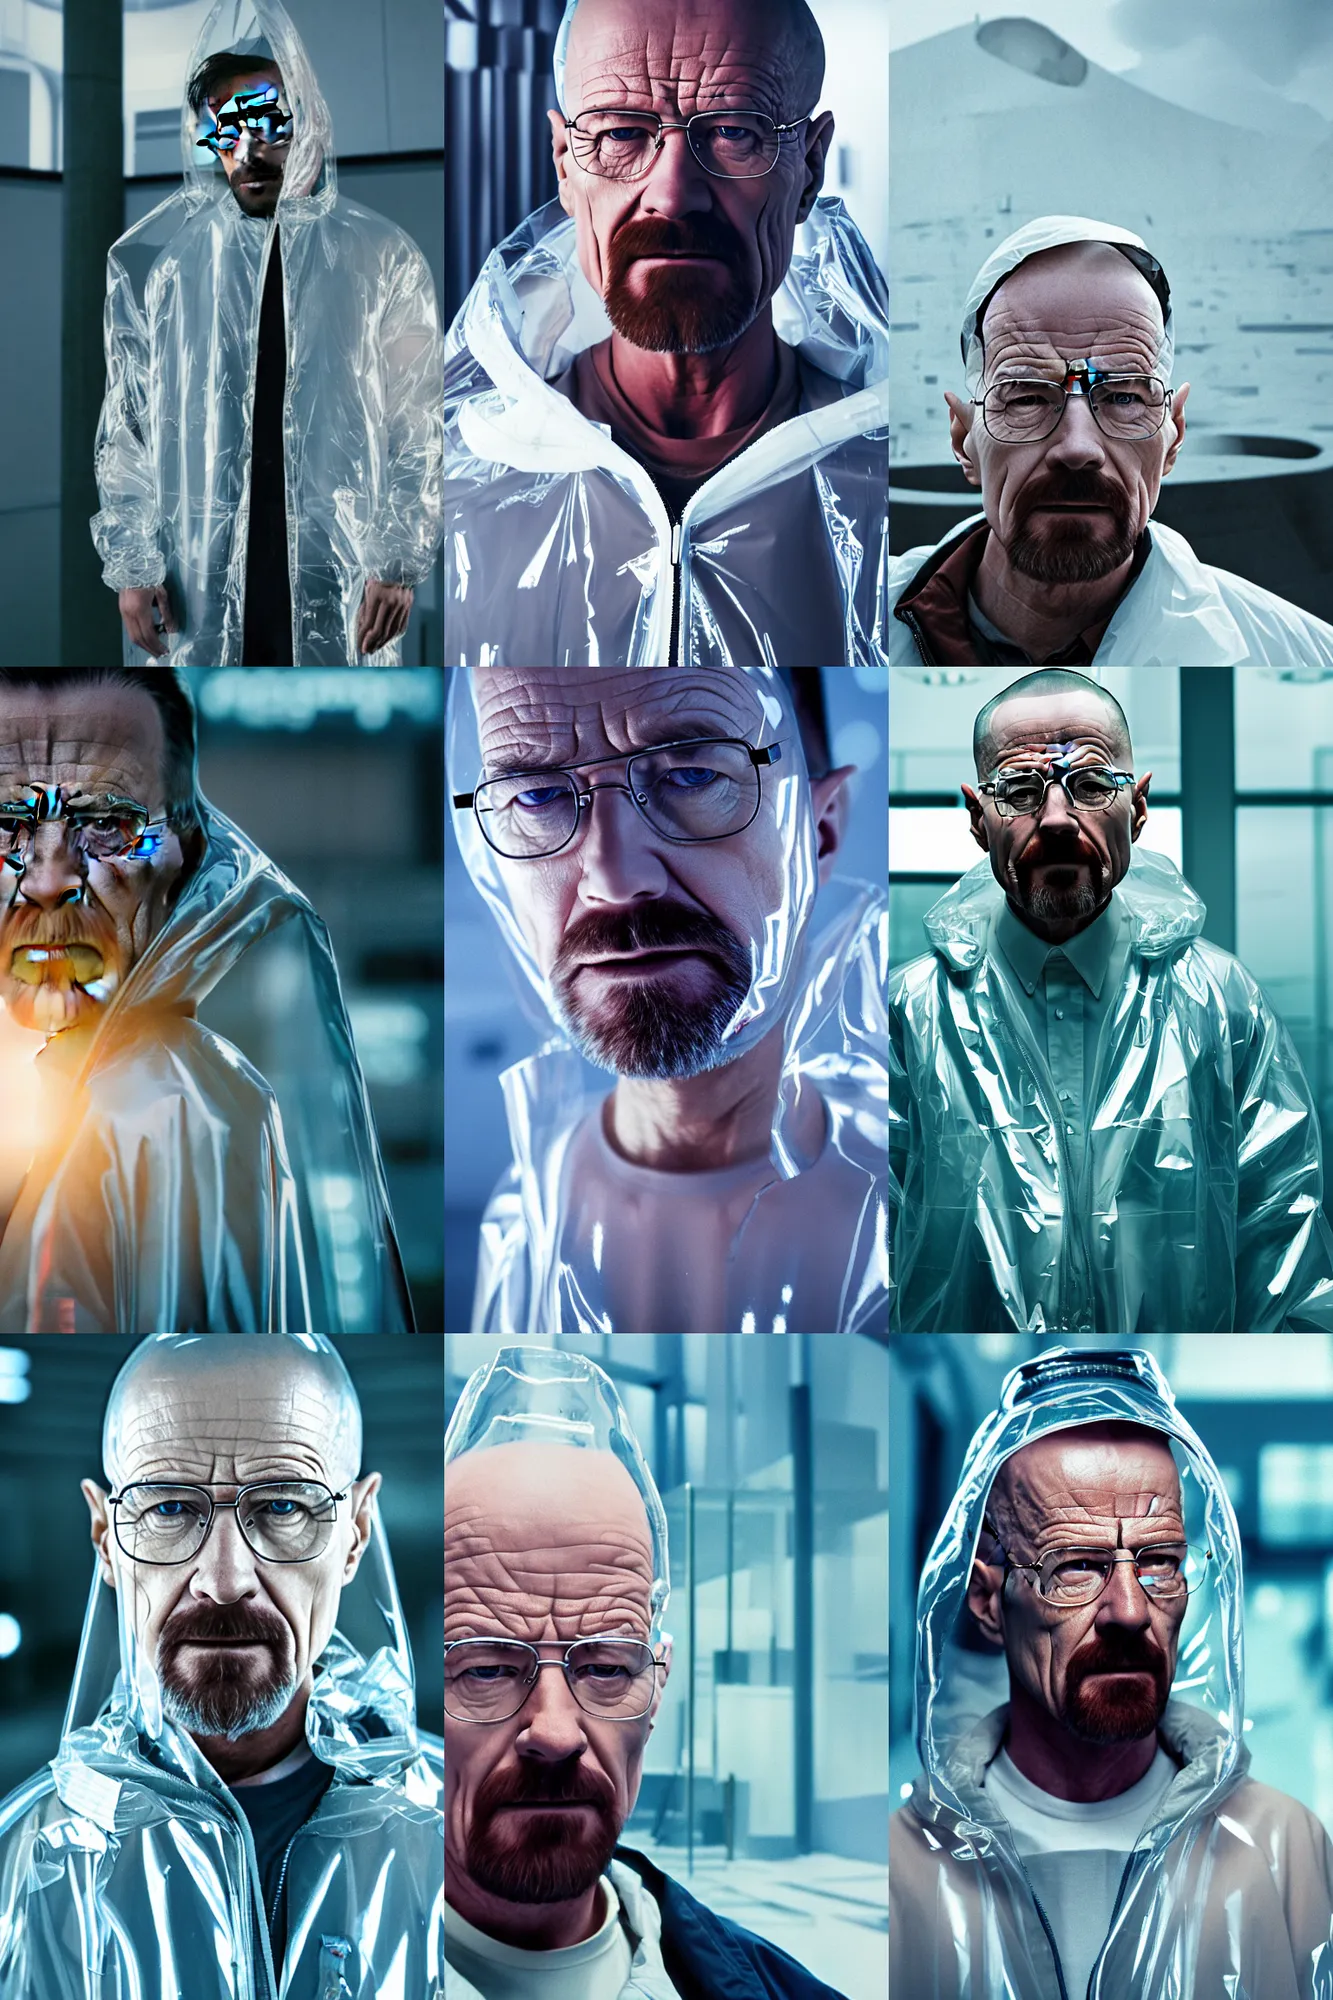 Prompt: Cinestill 50d, 8K, highly detailed, breaking bad style 3/4 extreme closeup portrait, clear eyes, focus on clear transparent raincoat walter white model, tilt shift zaha hadid style laboratory background: famous blade runner remake, new mexico lab scene